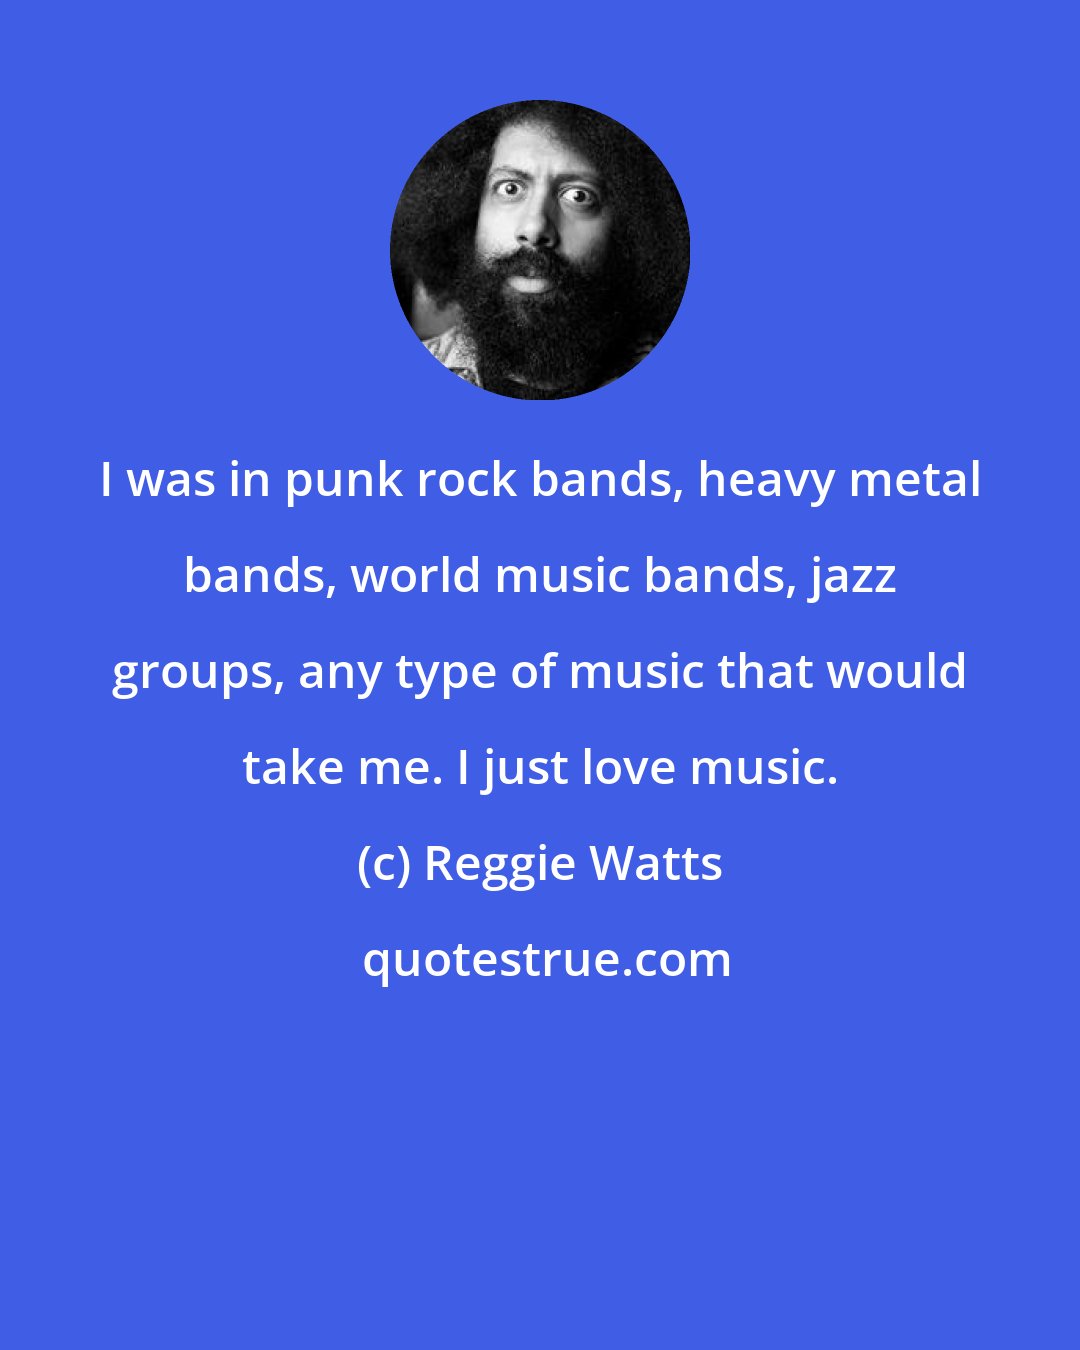 Reggie Watts: I was in punk rock bands, heavy metal bands, world music bands, jazz groups, any type of music that would take me. I just love music.